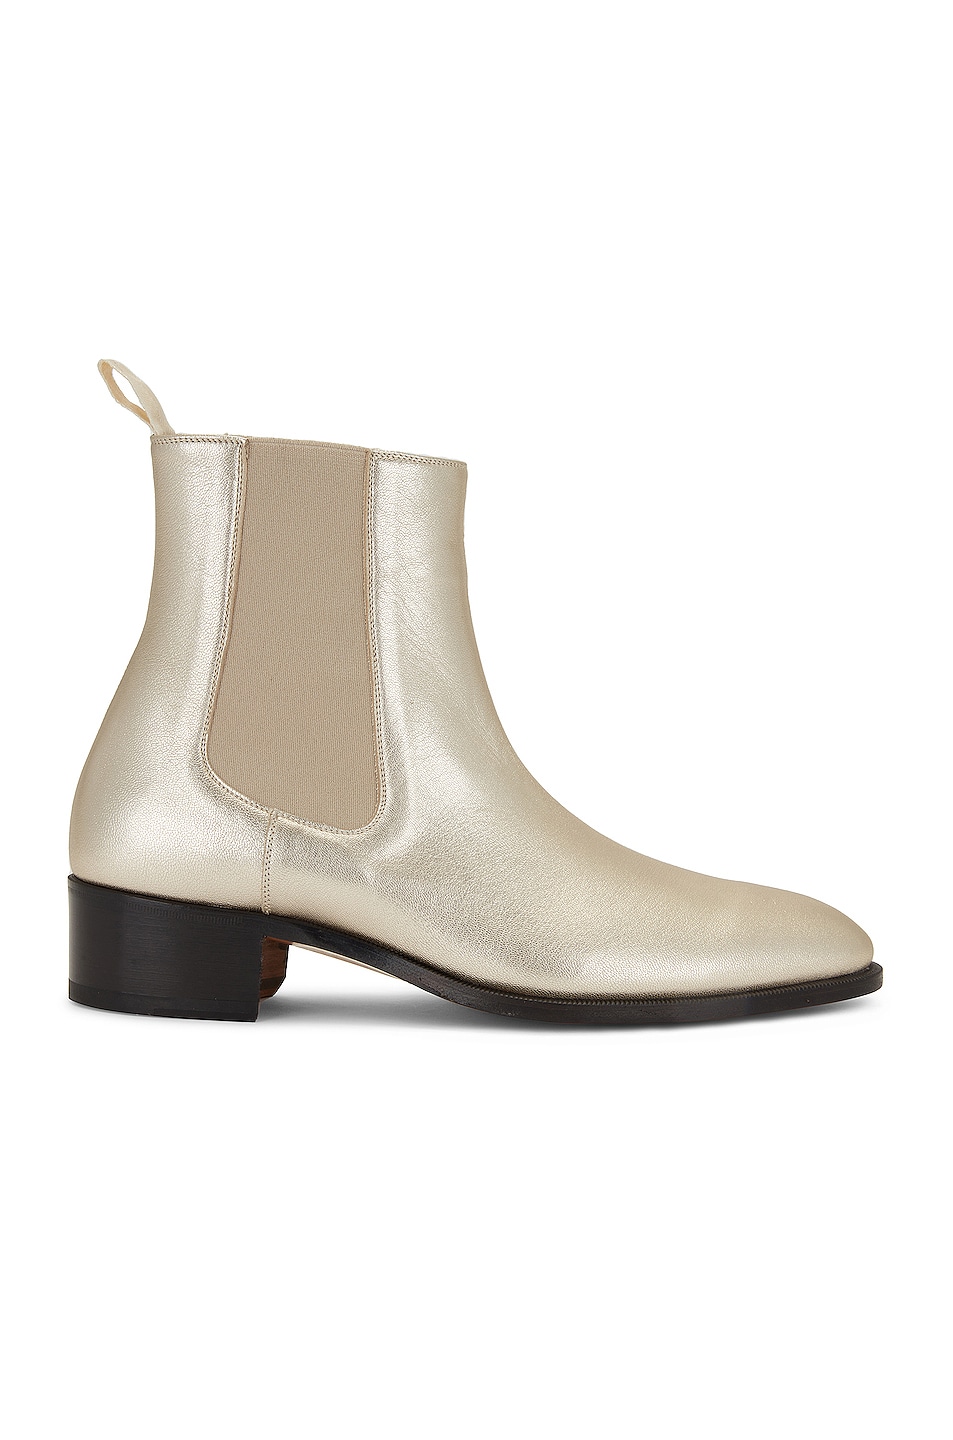 Image 1 of TOM FORD Metallic Leather Ankle Boots in Light Gold